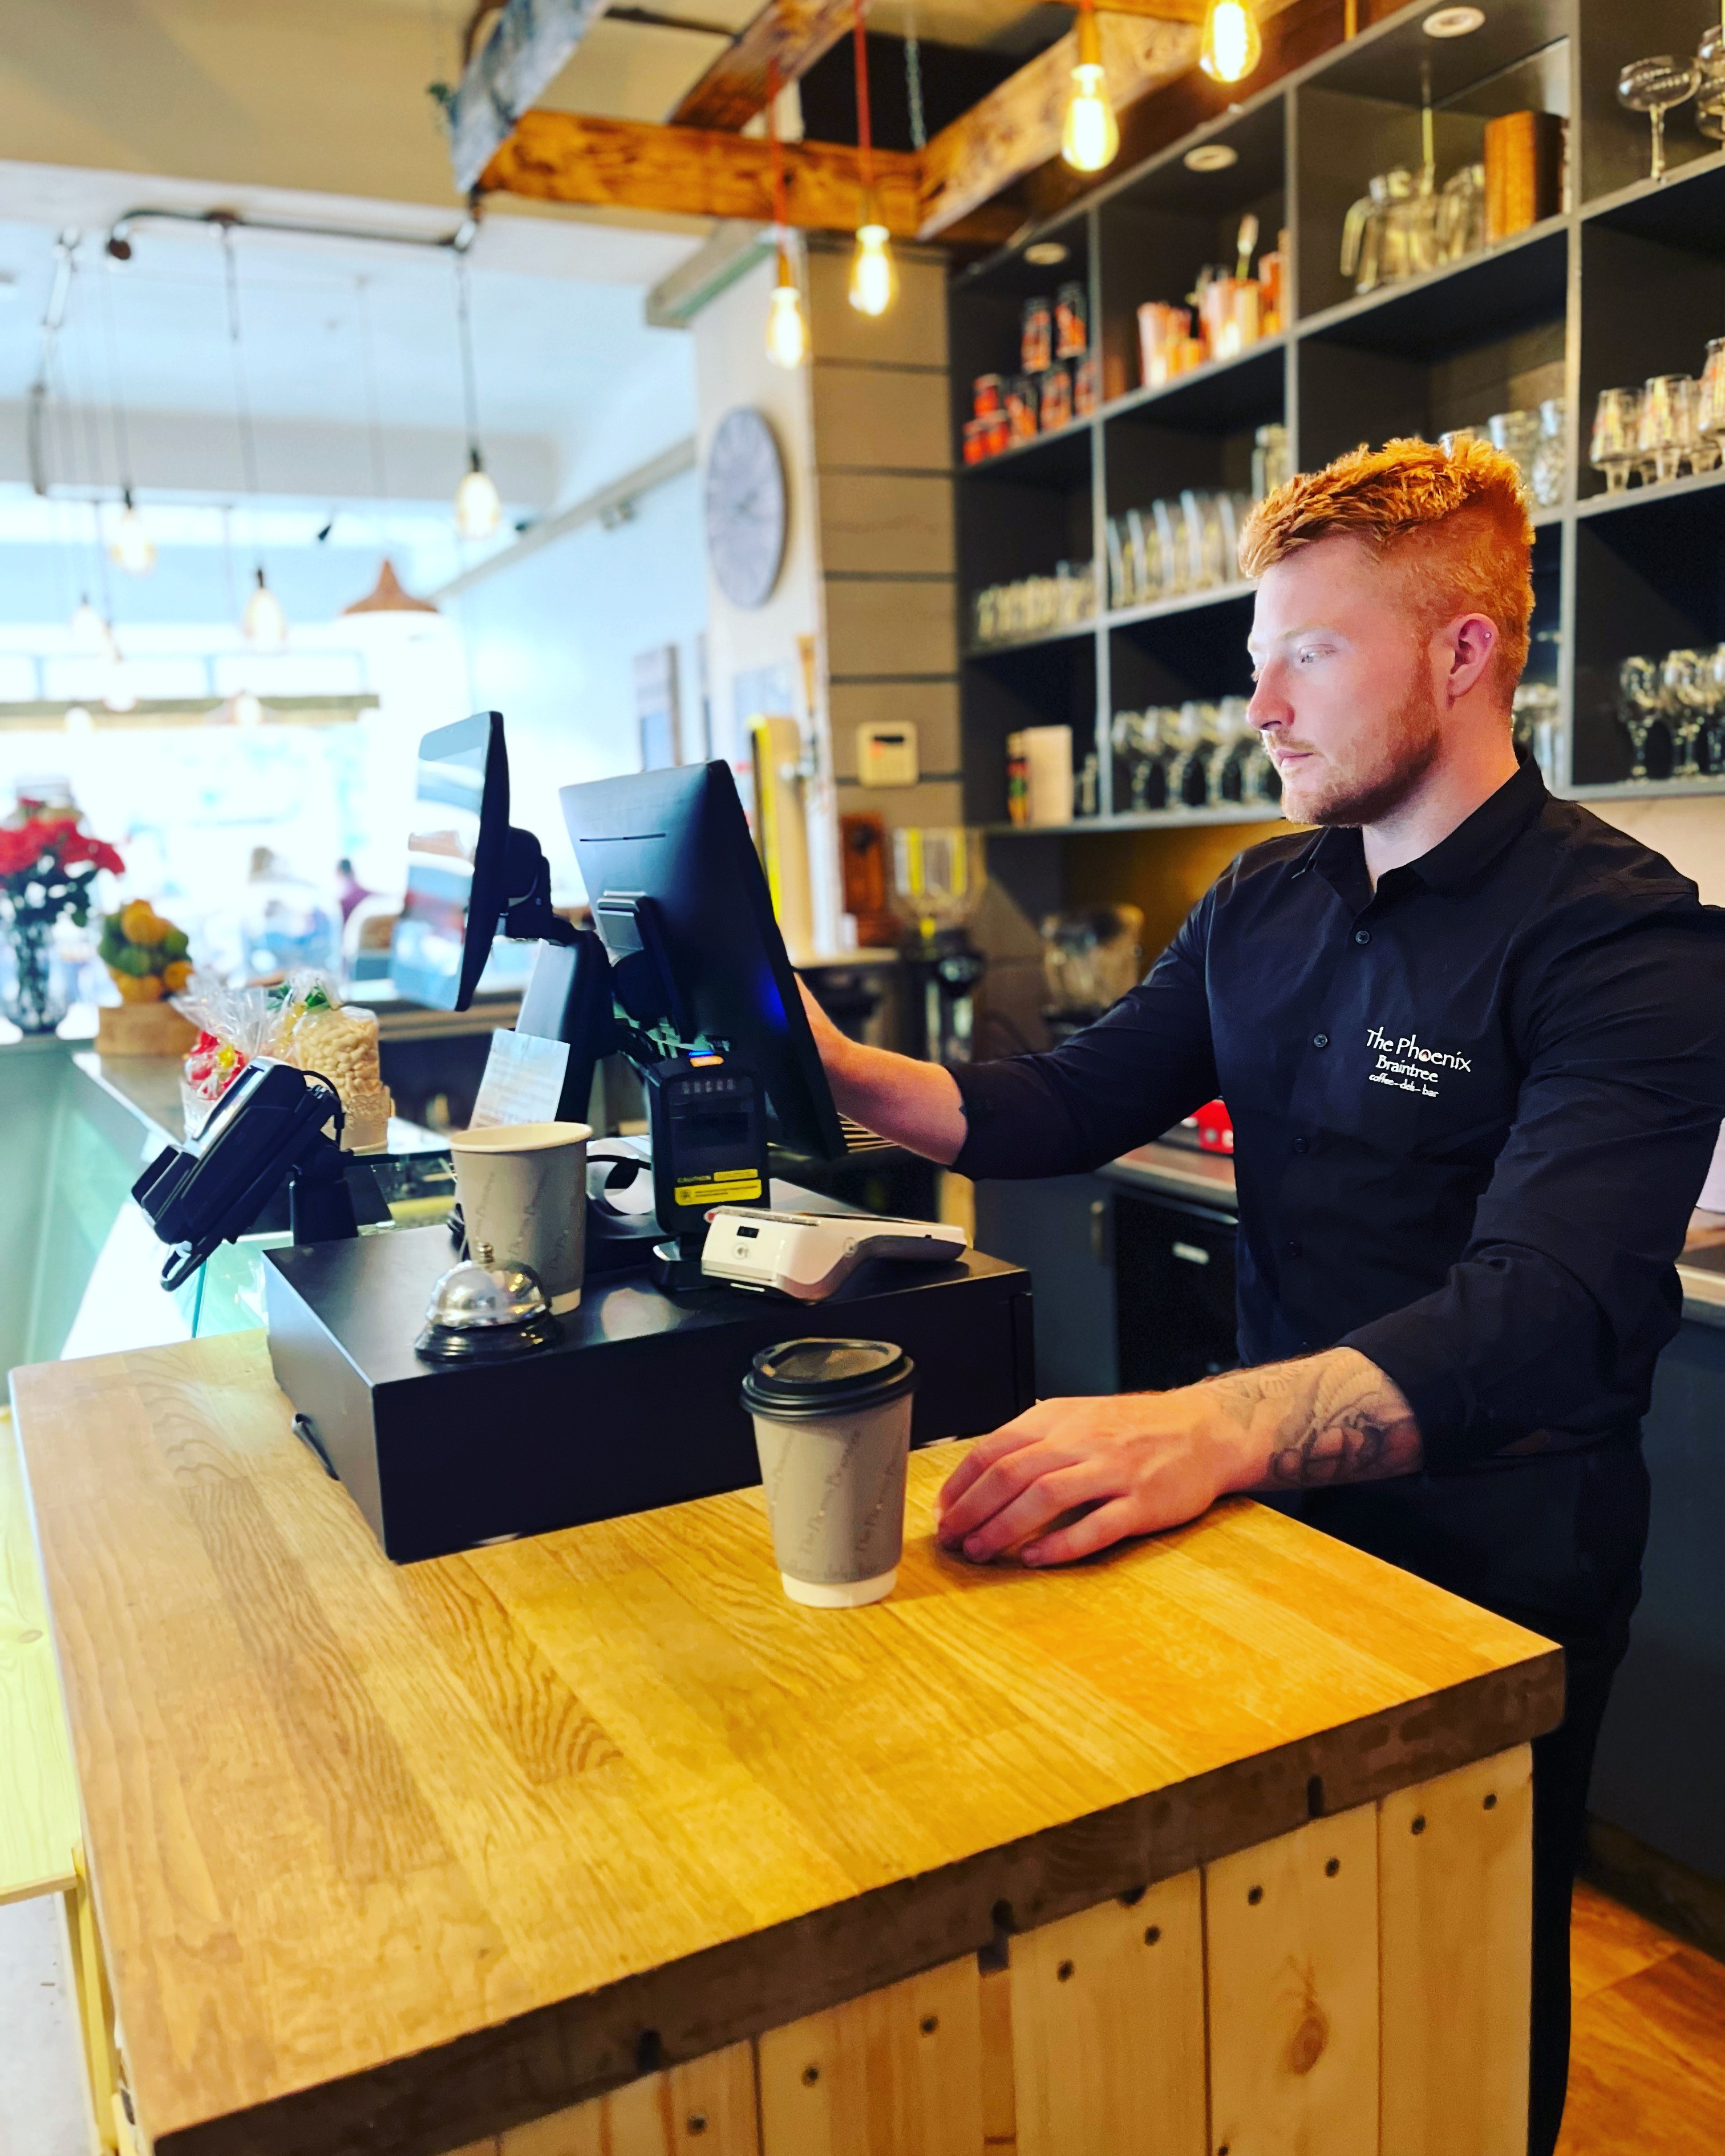 Manager stands at till in new deli bar wearing black shirt